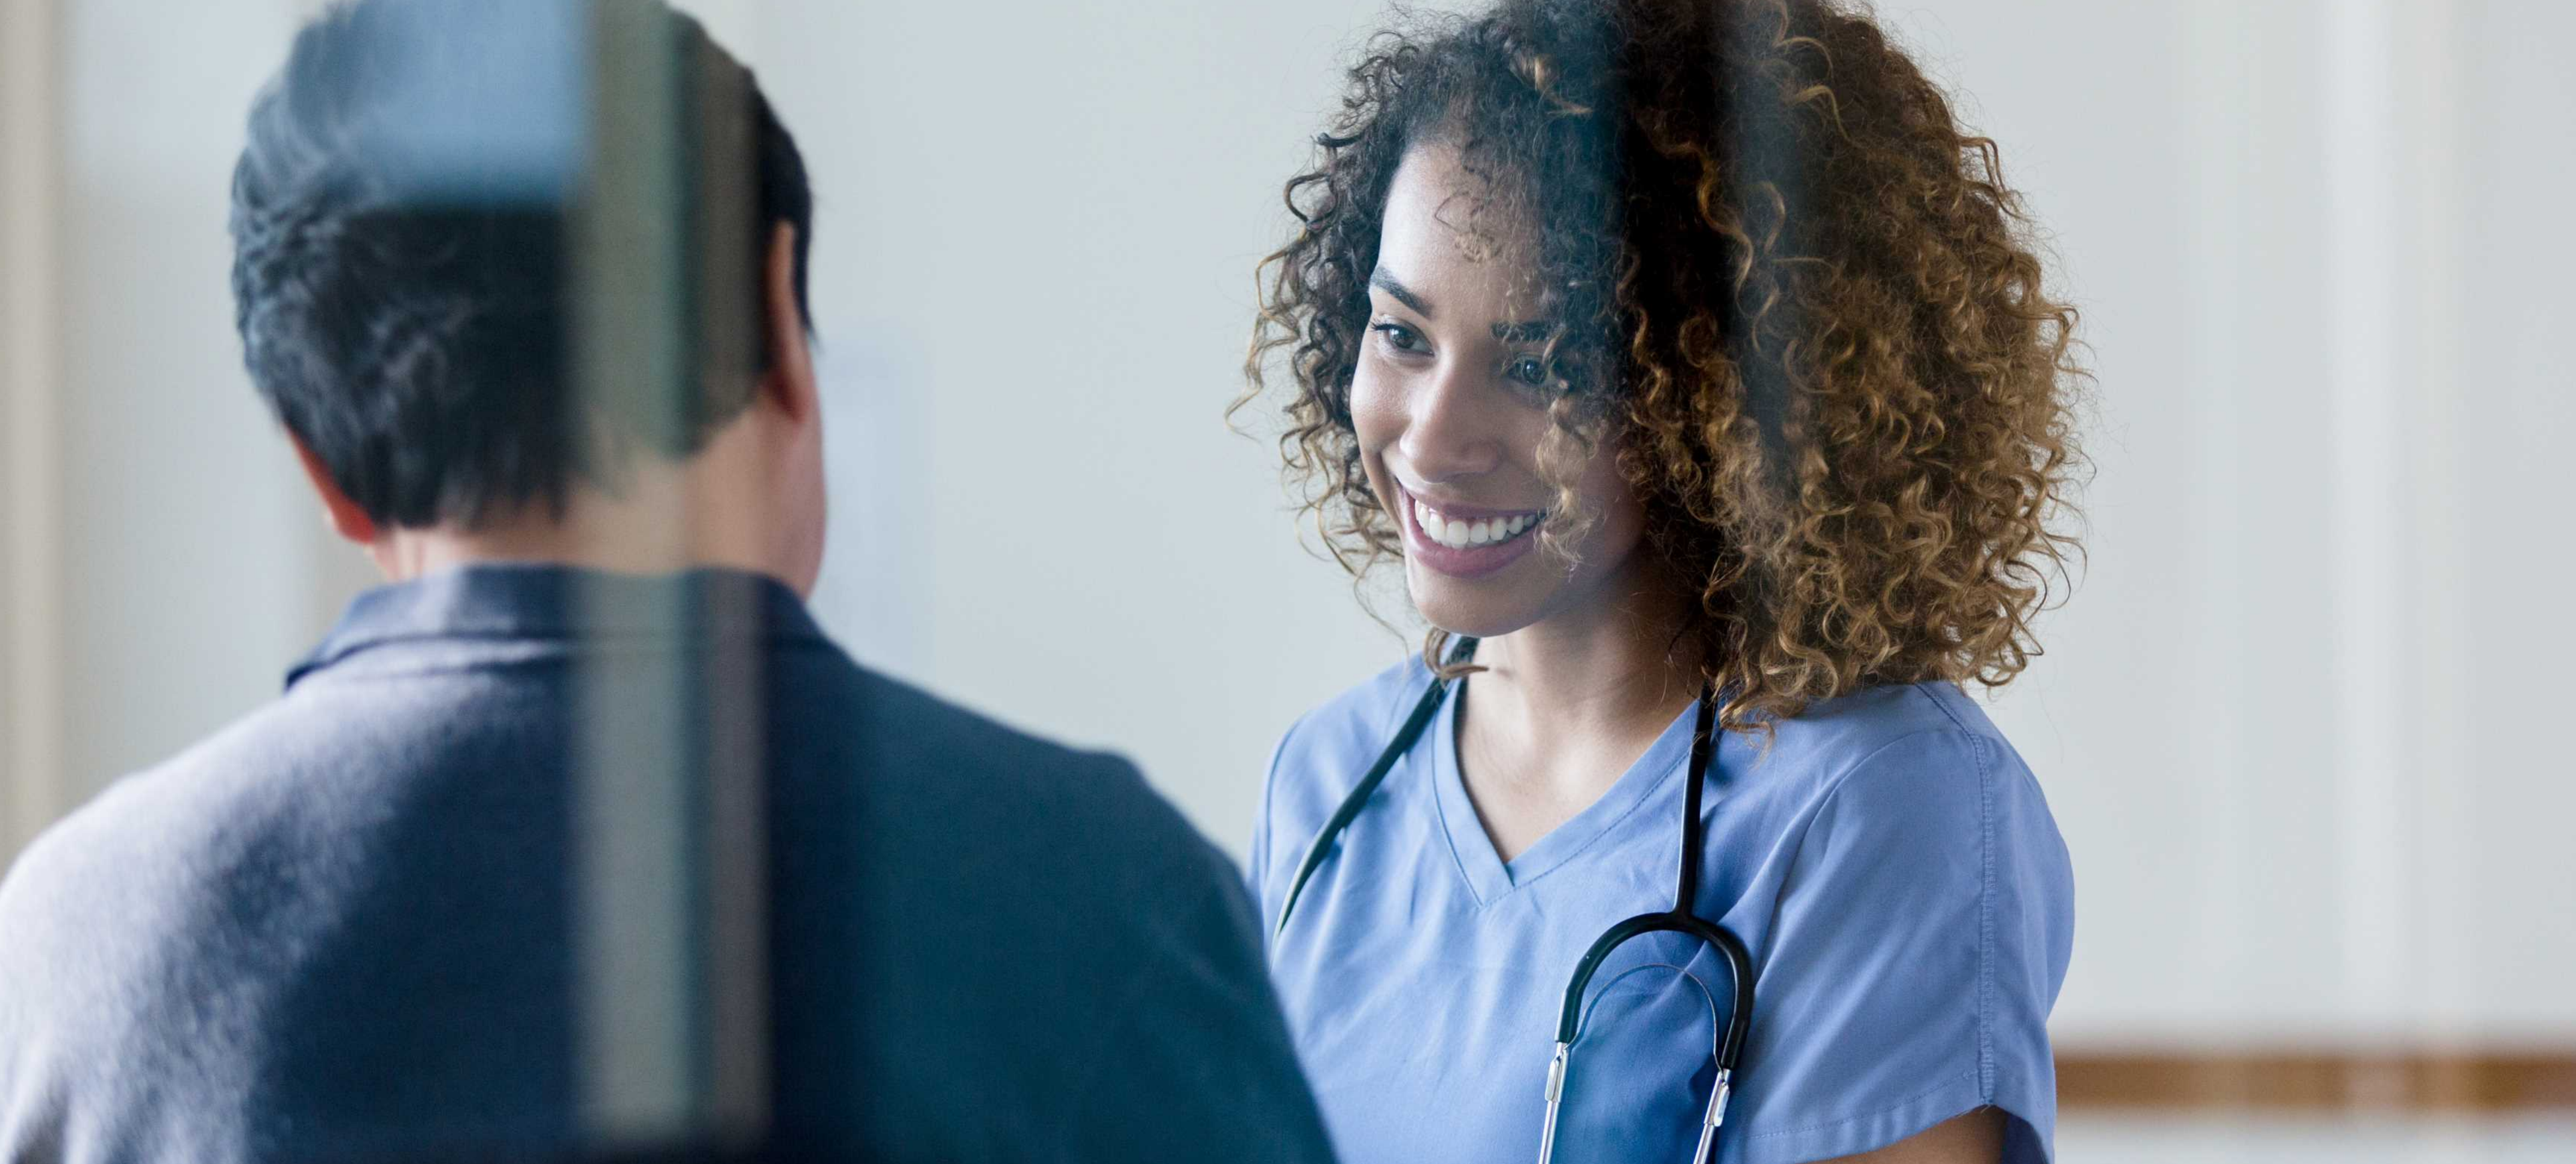 Woman doctor smiling at male patient or colleague